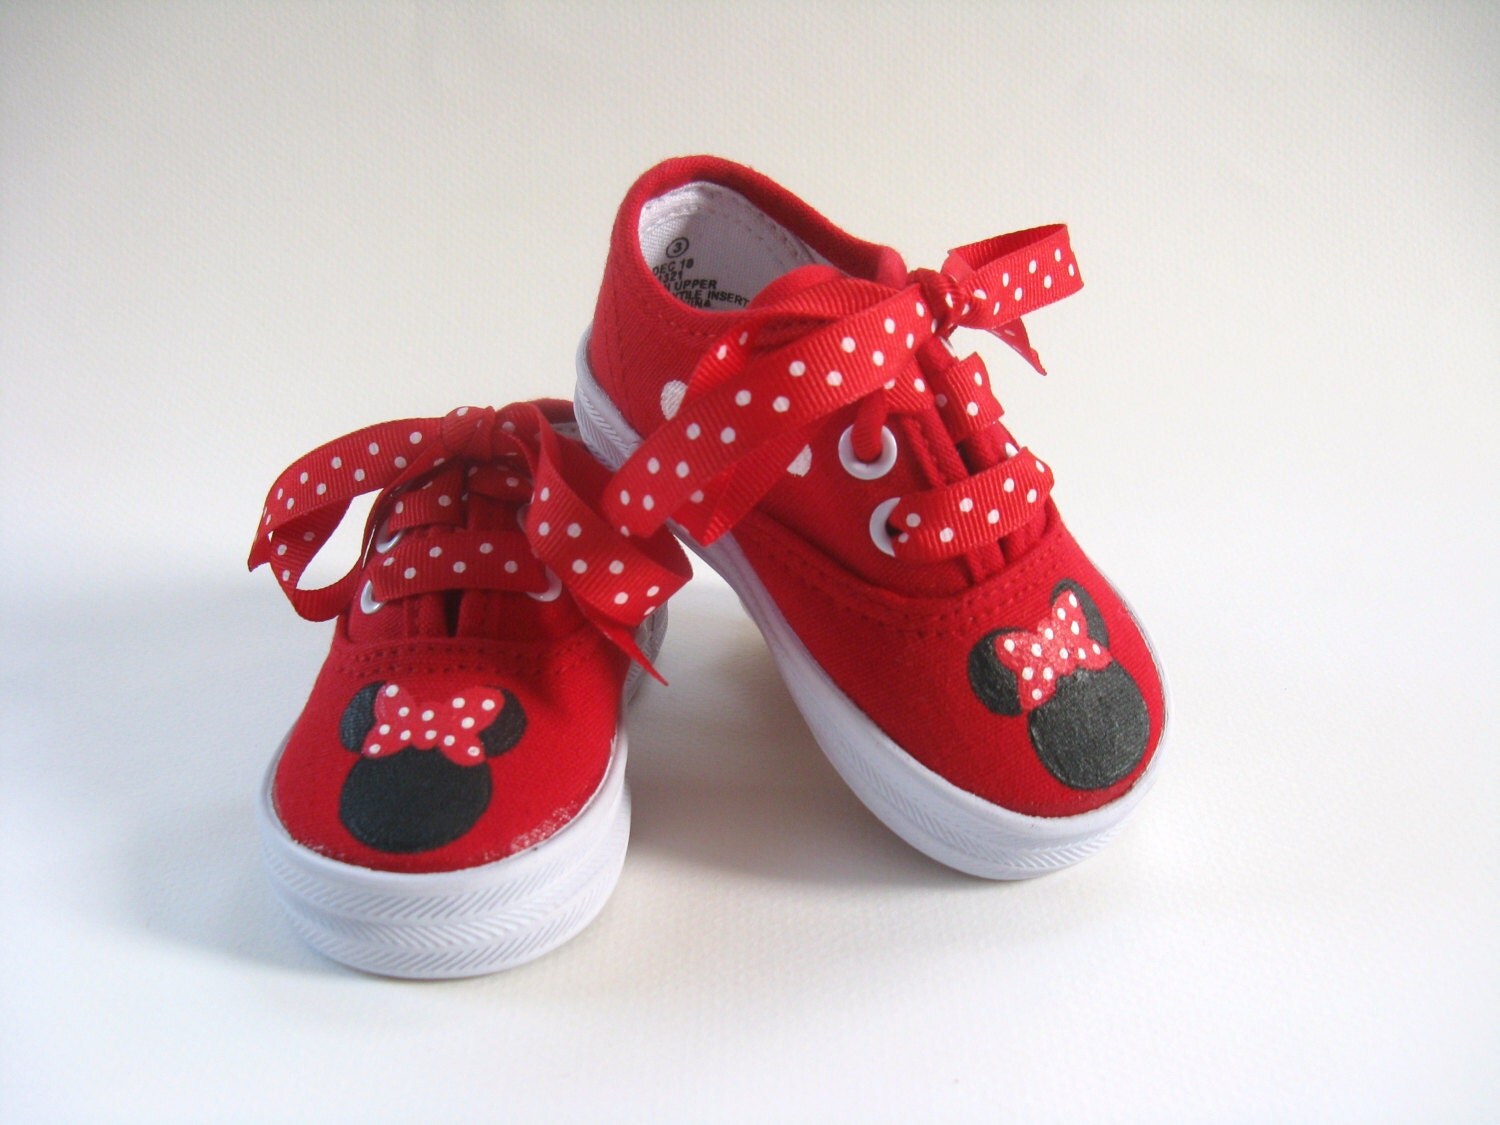 Girls Minnie Mouse Shoes Baby and Toddler by boygirlboygirldesign